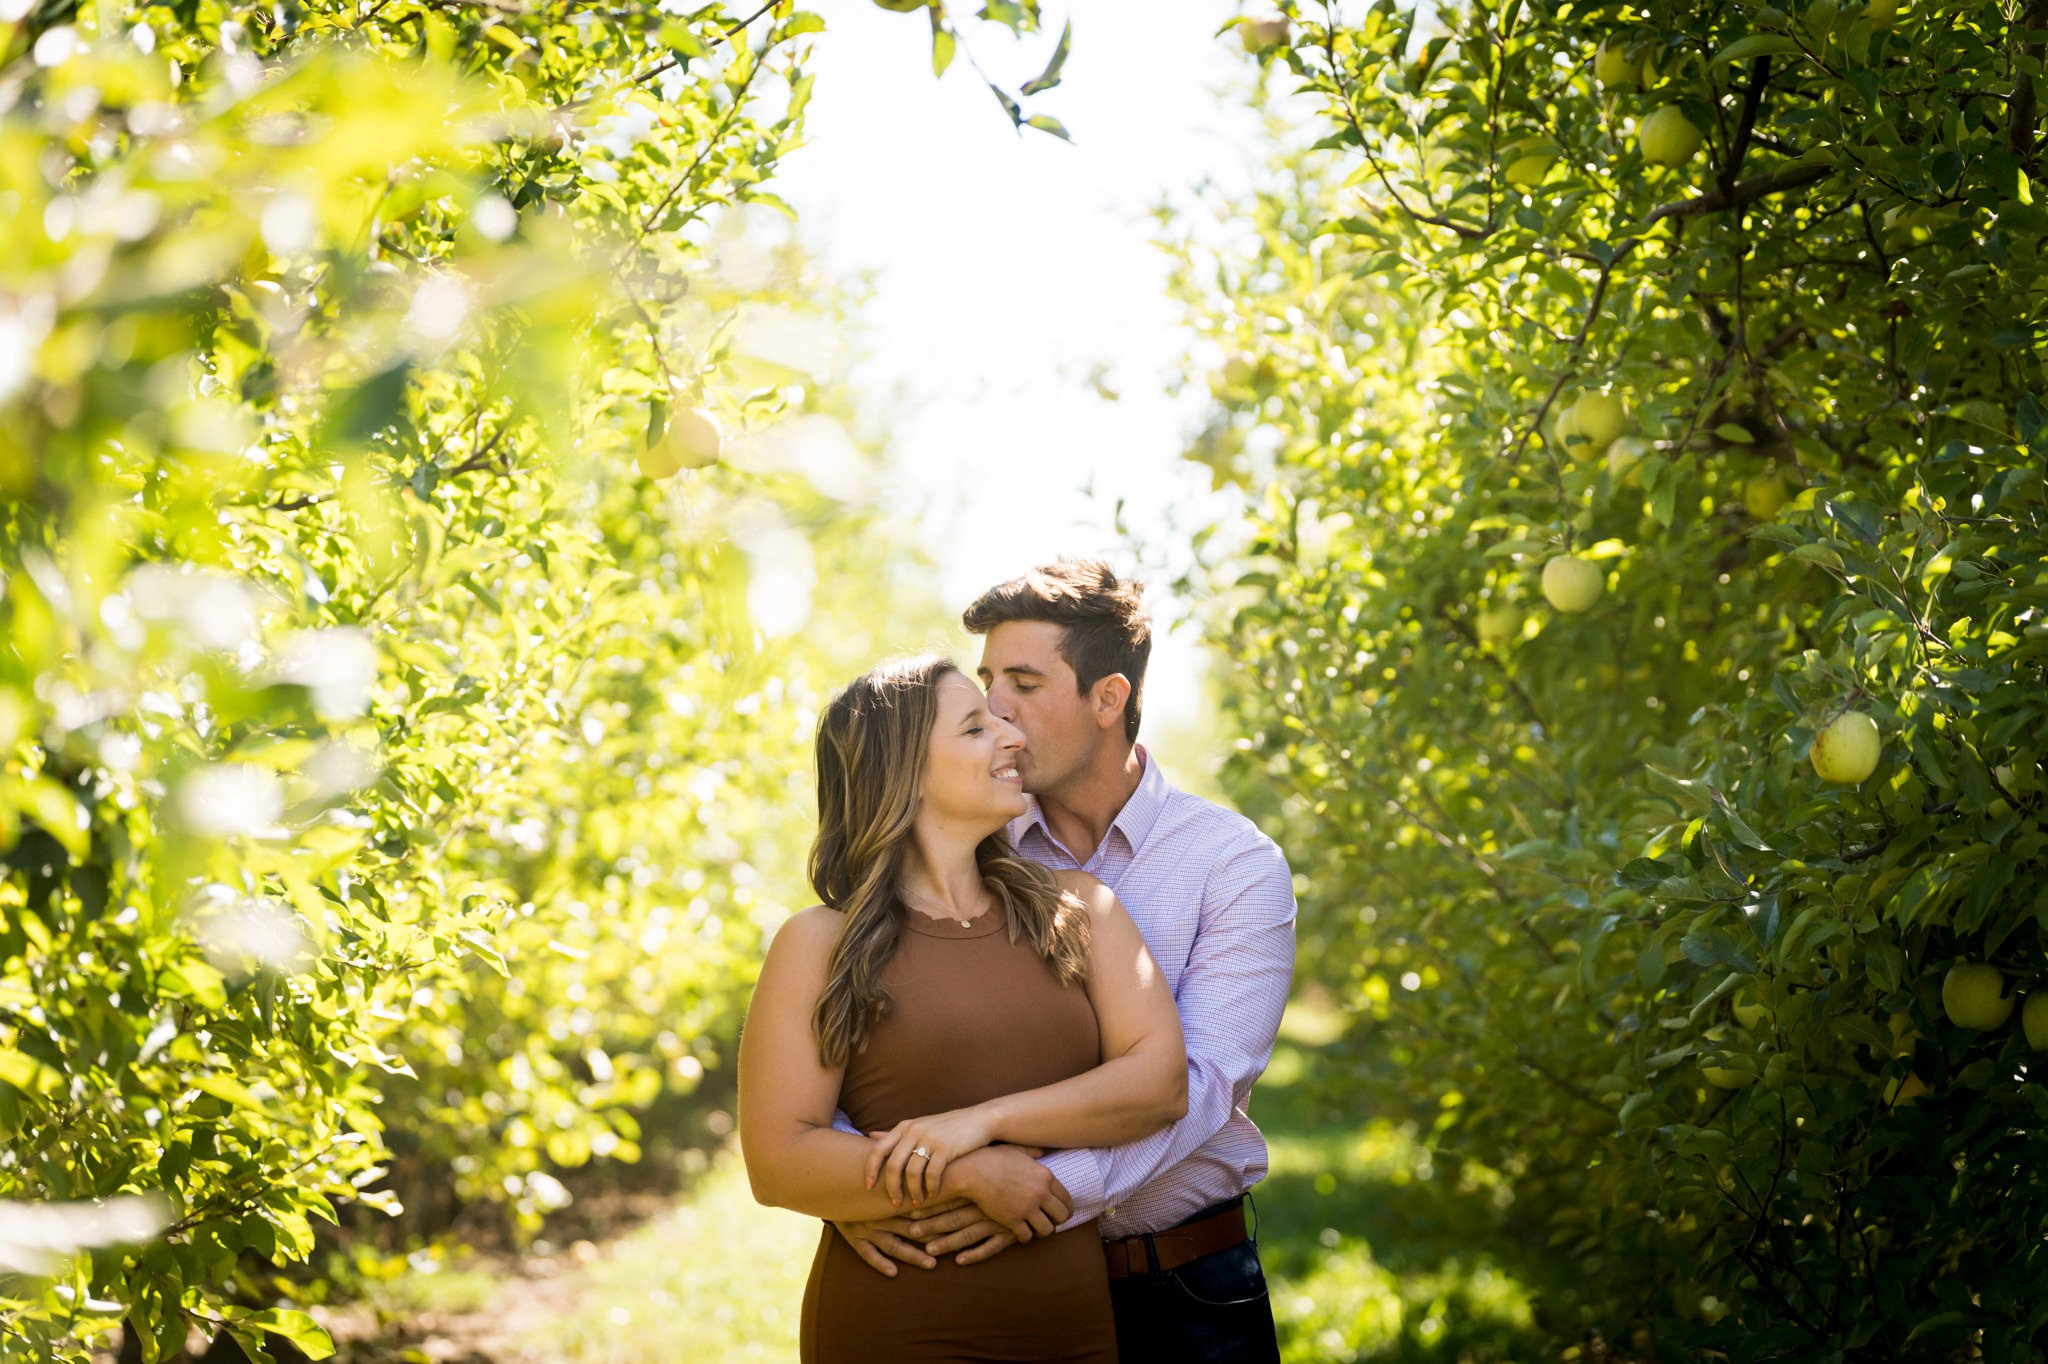 Standing in rows of apple trees, a couple embraces during their Blake's Apple Orchard engagement session.